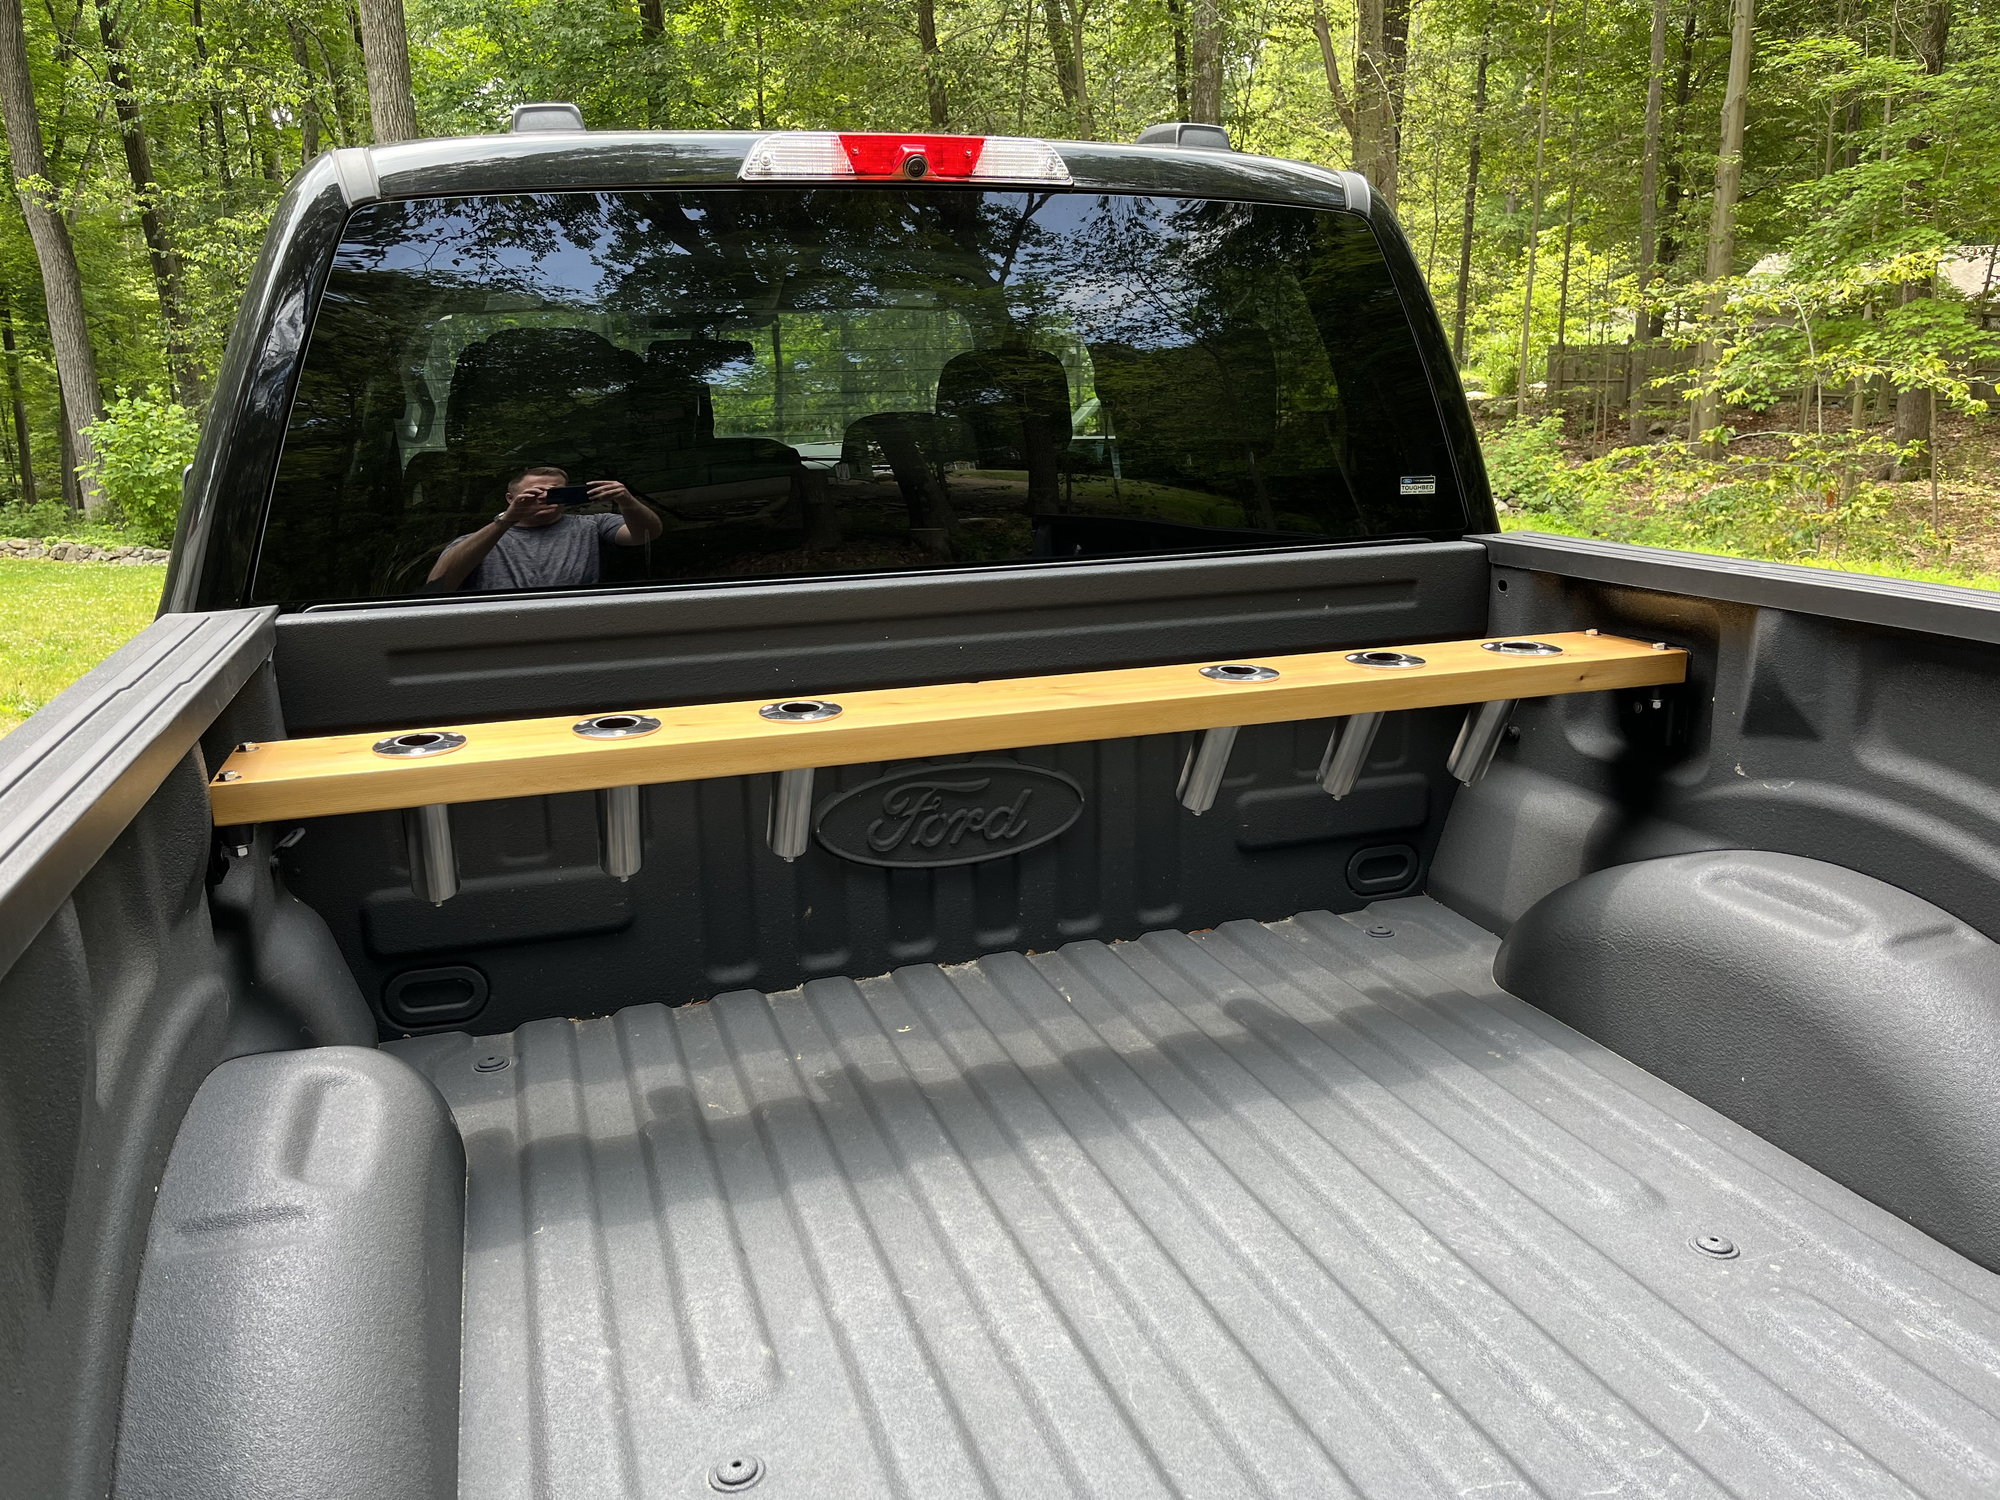 Truck Rod Rack - The Hull Truth - Boating and Fishing Forum